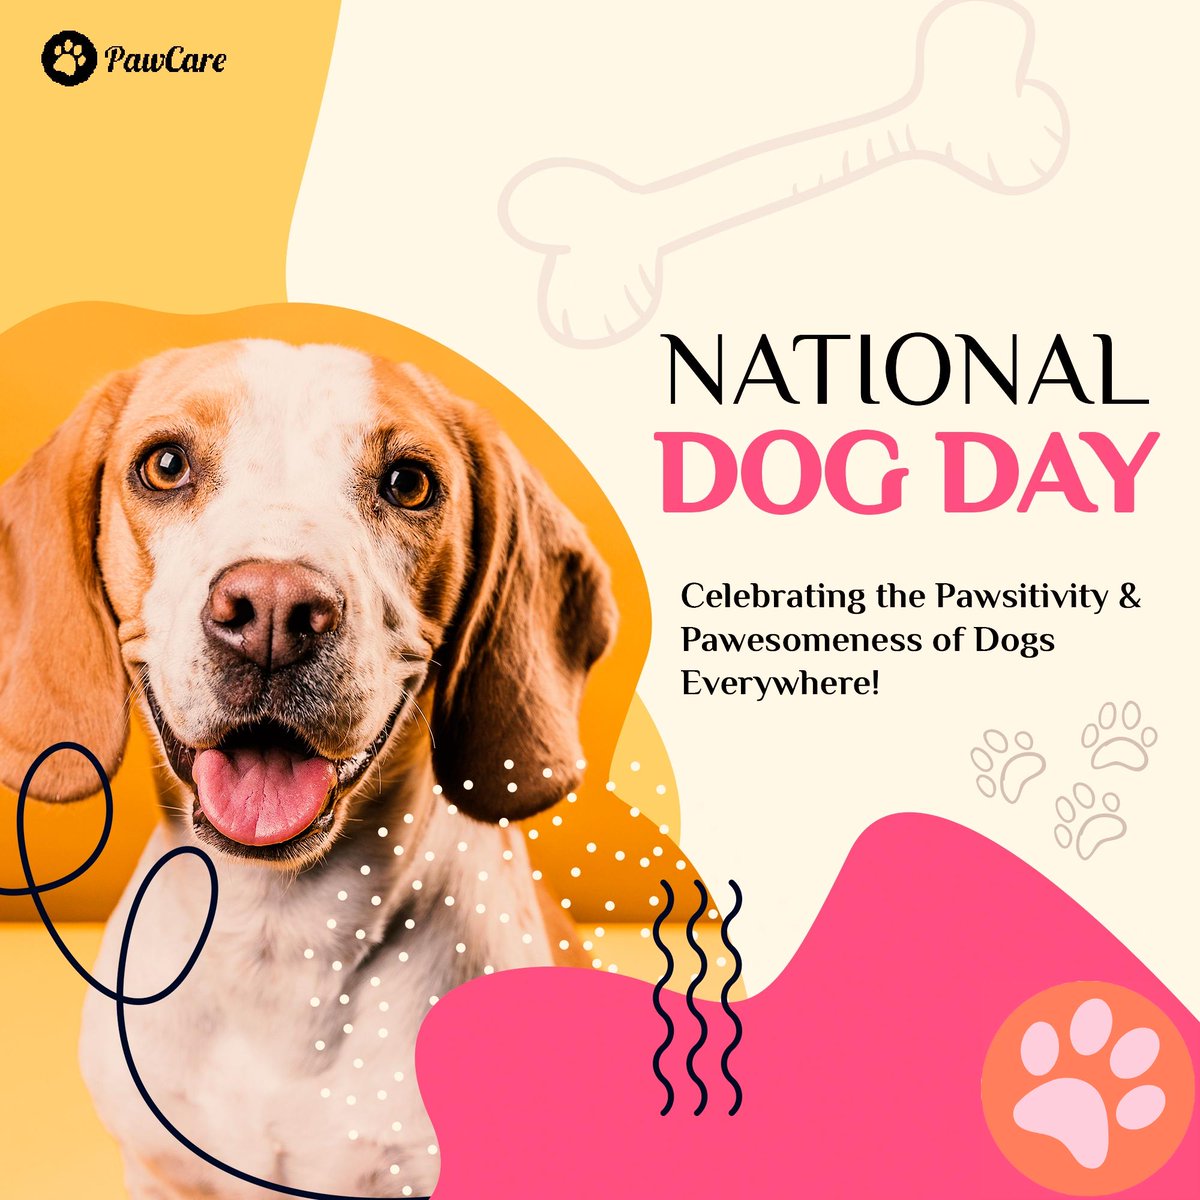 Furry Friends Make the World a Better Place. Happy National Dog Day!
.
.
#NationalDogDay2023 #NationalDogDay #mypawcare #pawcare #PawCareSuccess #PetCareLove #healthydogs #HealthyPets #DogLovers #DogCuddles #AmericanFamilyCare #dogsofinstagram #puppylove #puppylife #Chicago #U...